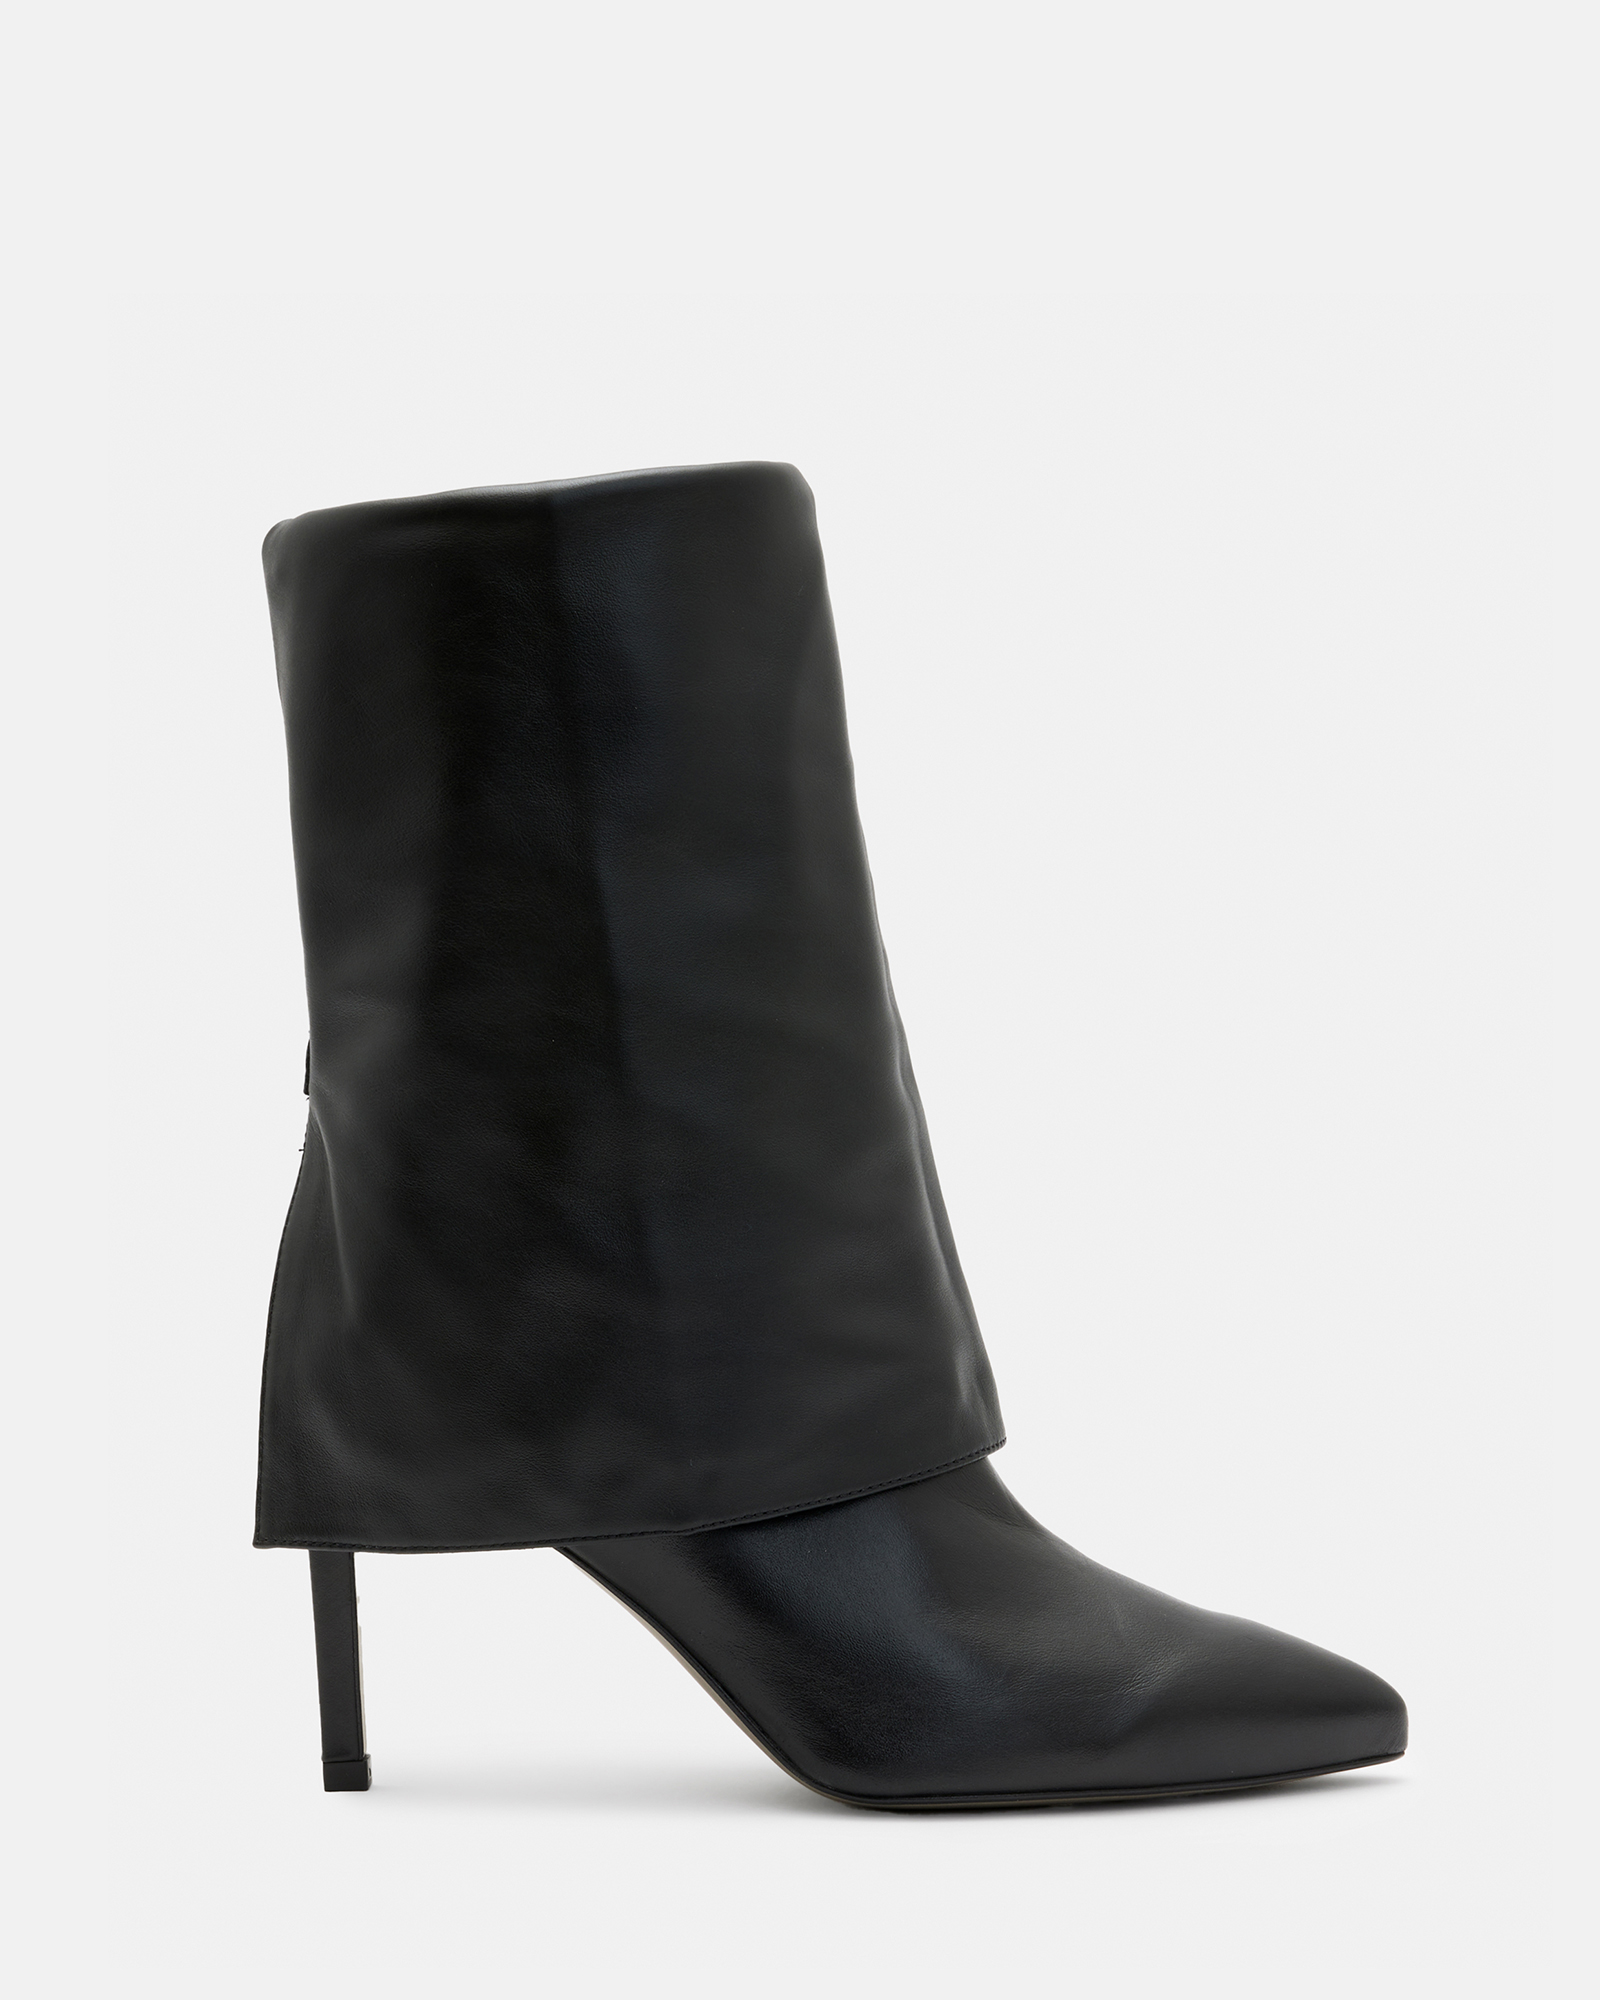 AllSaints Odyssey Knee High Folding Leather Boots